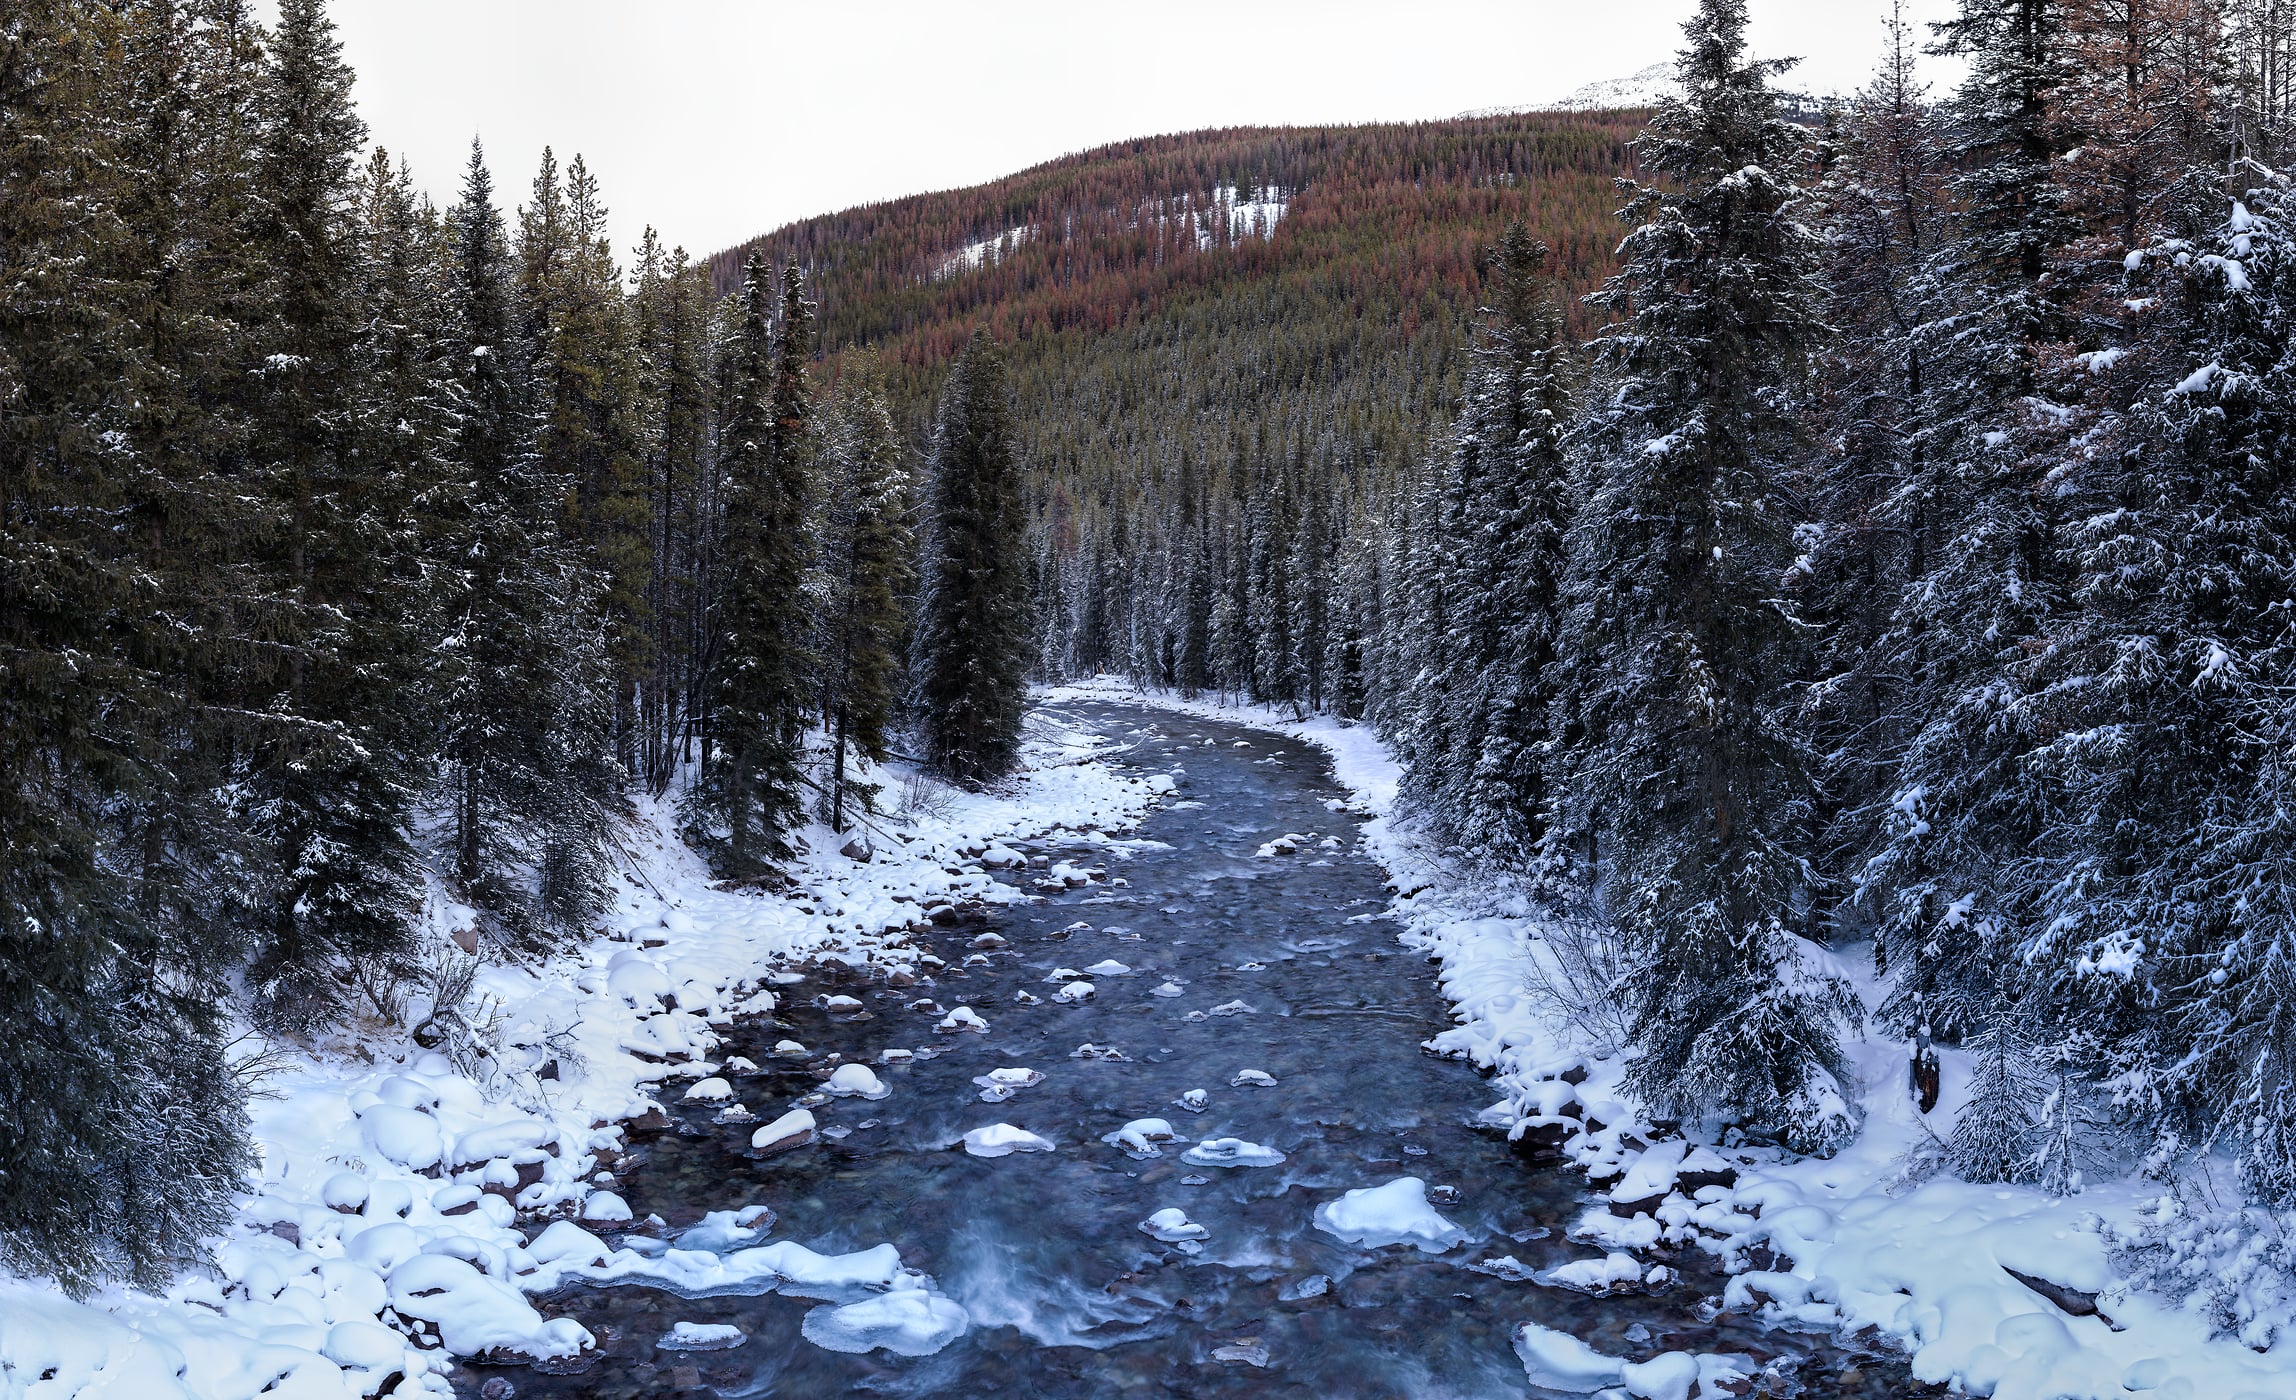 1,295 megapixels! A very high resolution, large-format VAST photo print of winter scene of a river with snow and evergreen trees; nature photograph created by Scott Dimond in Jasper National Park, Alberta, Canada